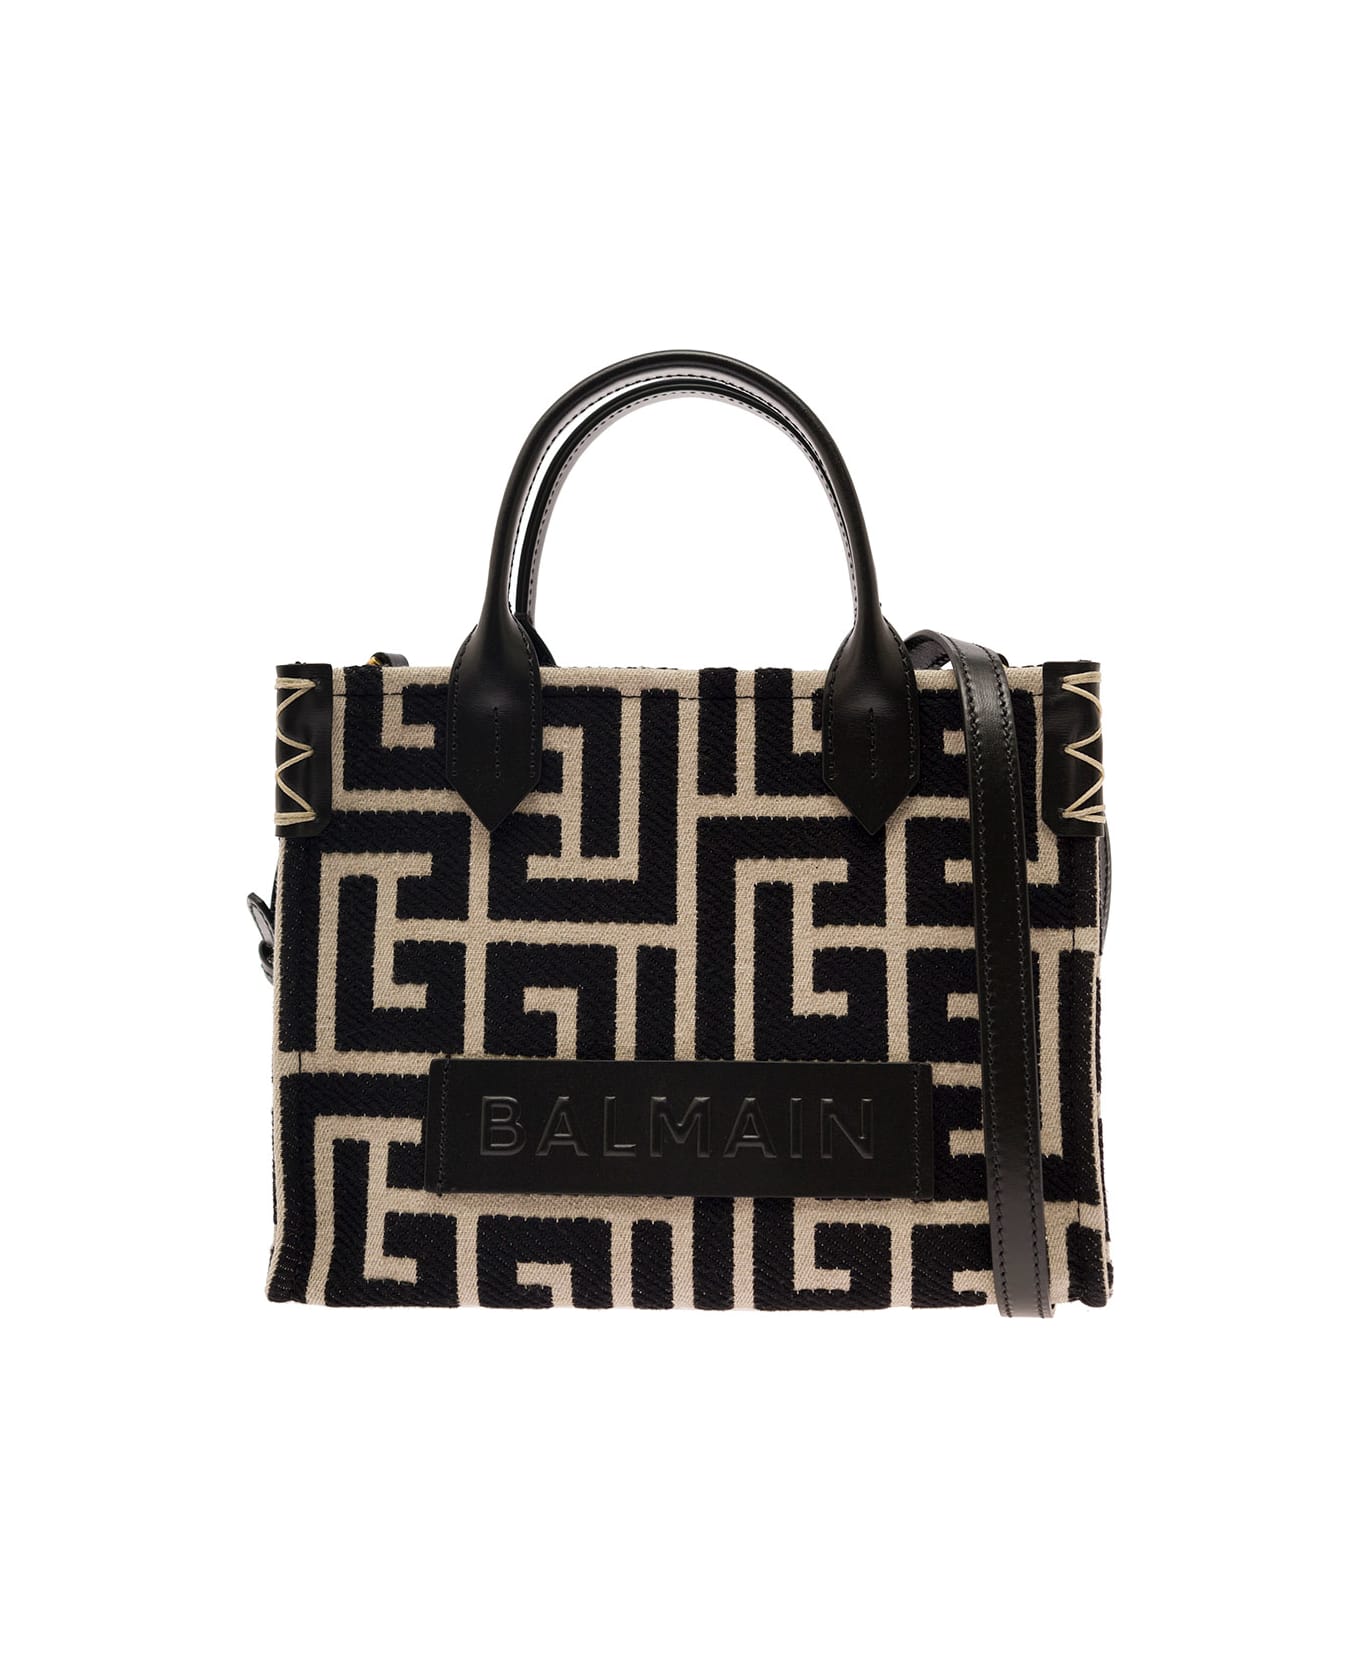 Balmain 'b-army' Black And White Tote Bag With Logo Patch And Monogram In Canvas Woman - Black